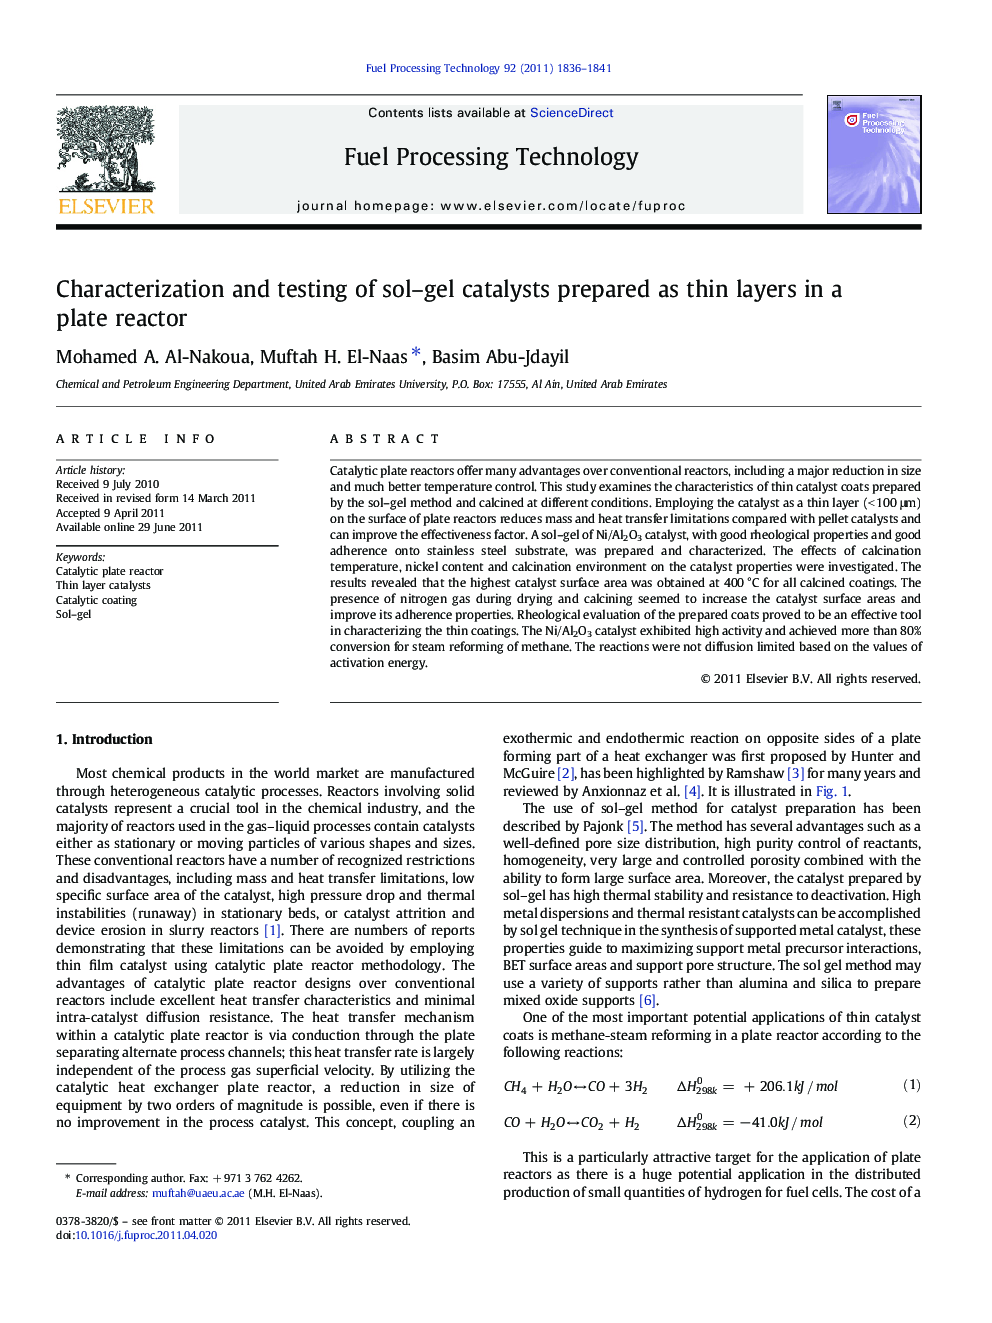 Characterization and testing of sol–gel catalysts prepared as thin layers in a plate reactor